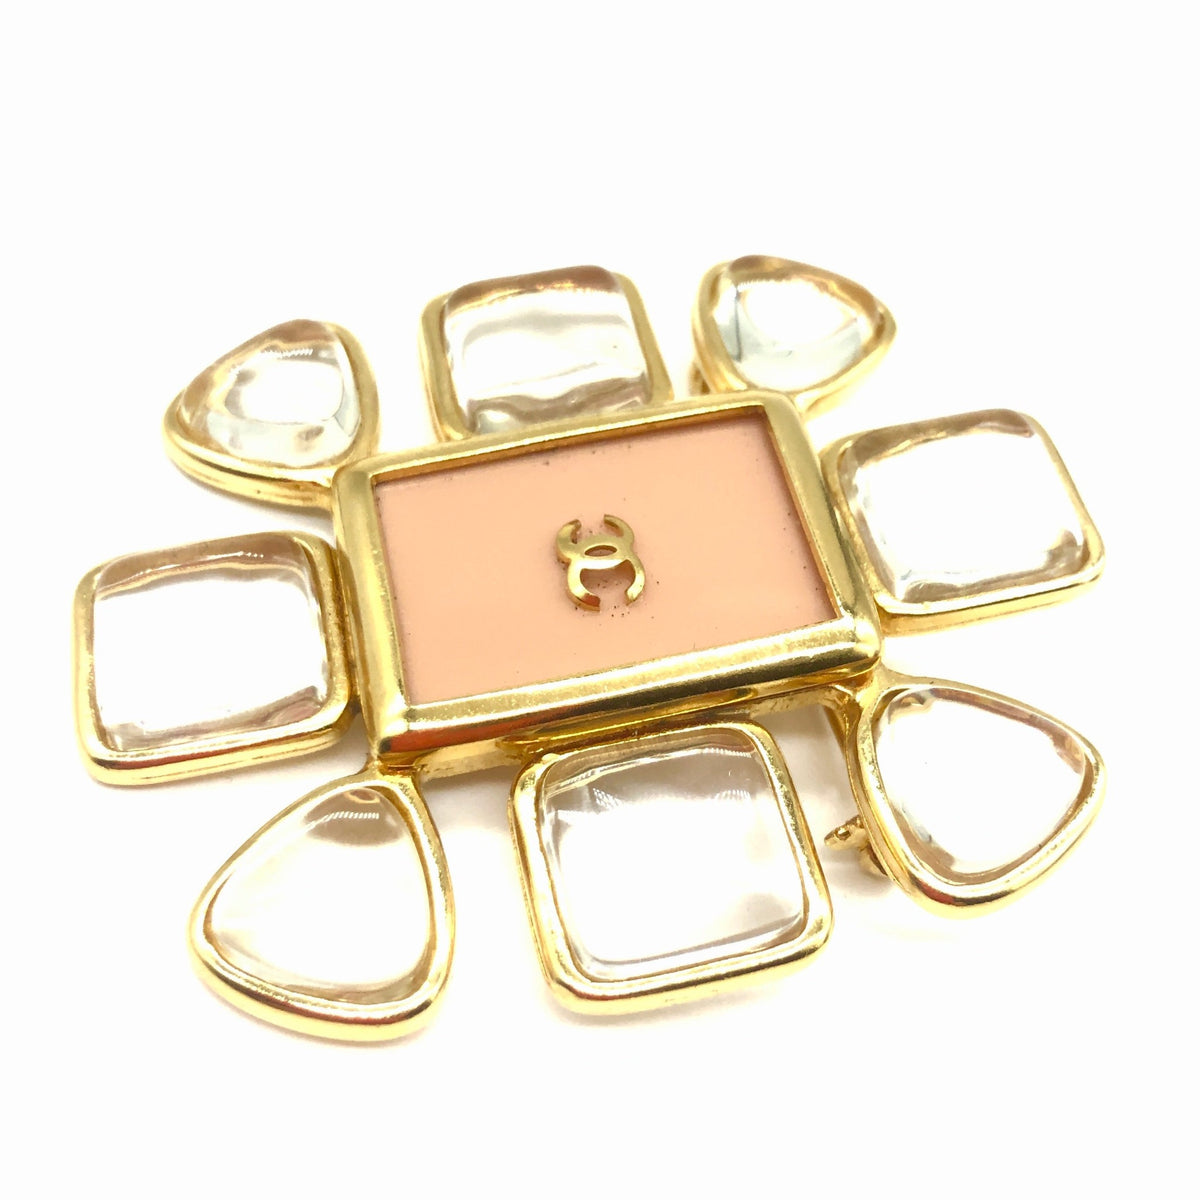 Vintage Chanel Pink Pin with Clear Lucite Petals – Very Vintage